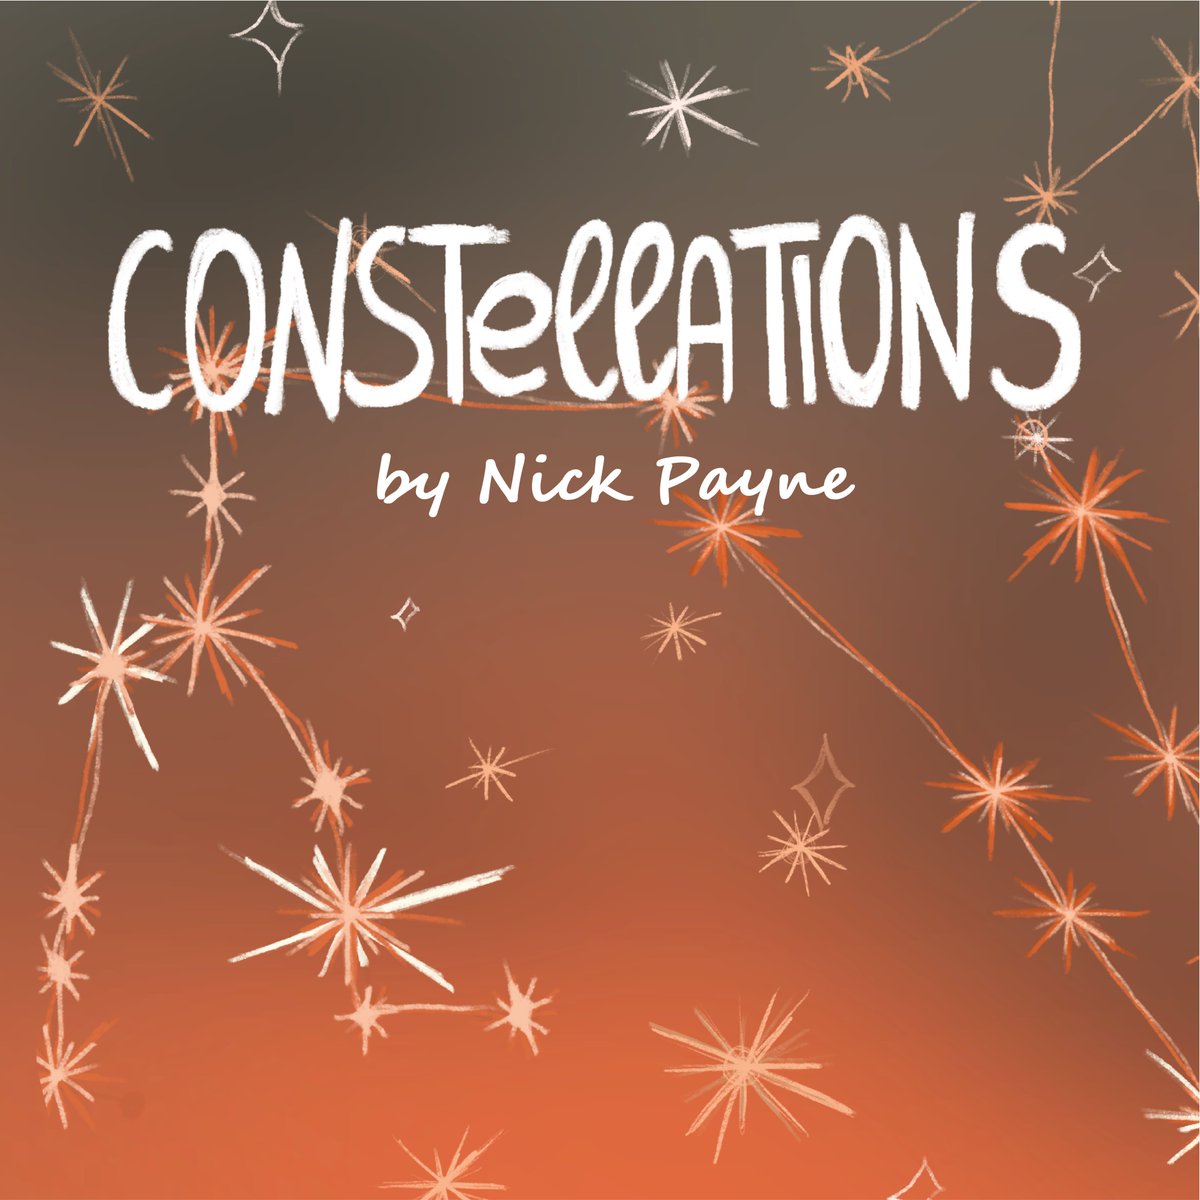 CONSTELLATIONS by Nick Payne at @draytonarmsSW5 @burntorangeco 'a fine, energetic, honest presentation of an outstanding play, it’s a very young, very talented cast ... an excellent evening’s theatre' ★★★★ Chris Lilly FULL REVIEW OUT SOON Tickets draytonarmstheatre.co.uk/constellations